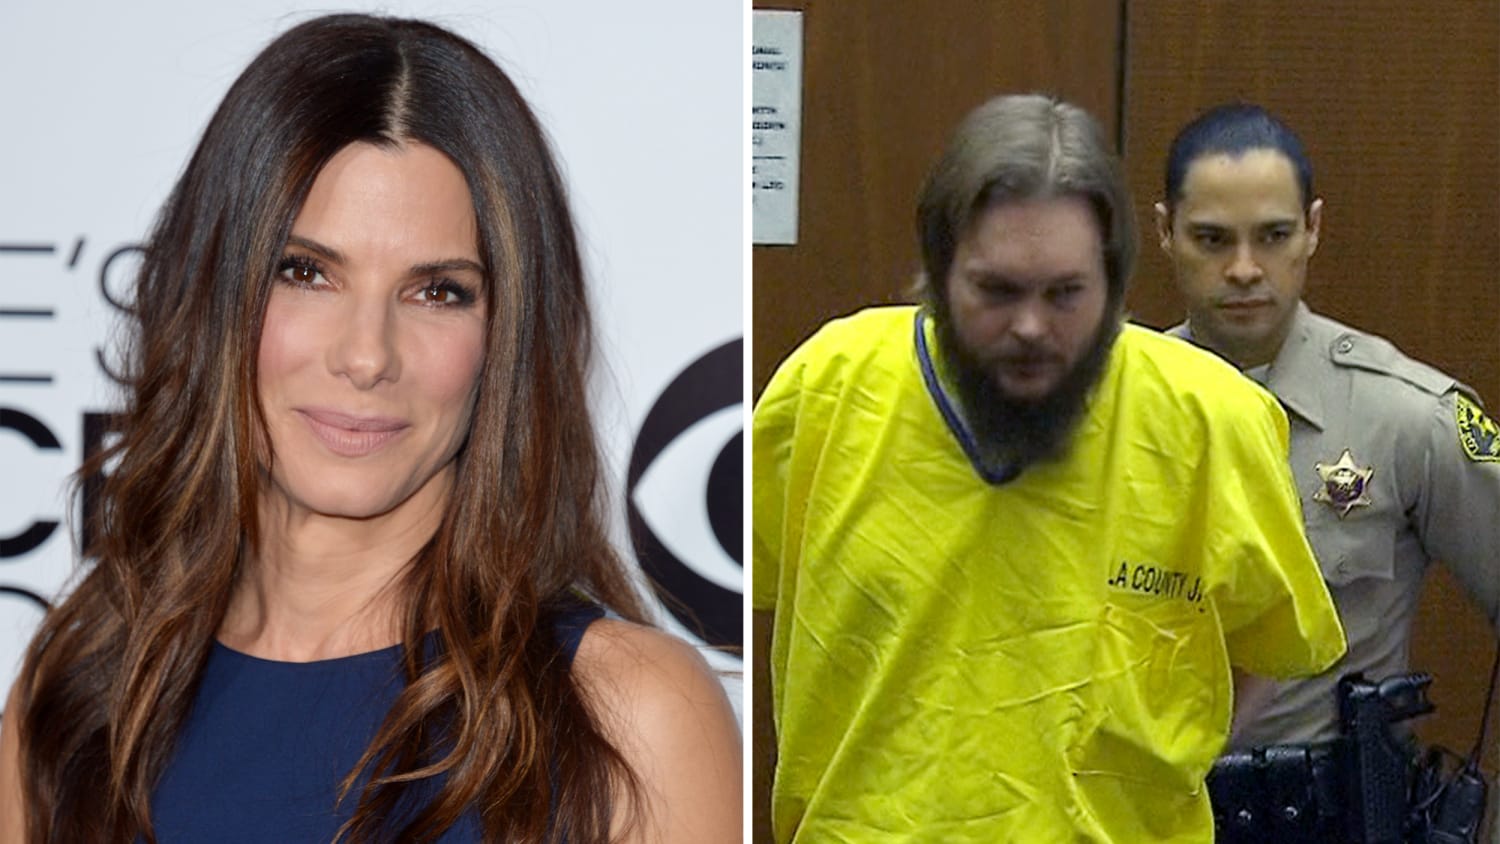 Sandra Bullock's chilling 911 call played in court